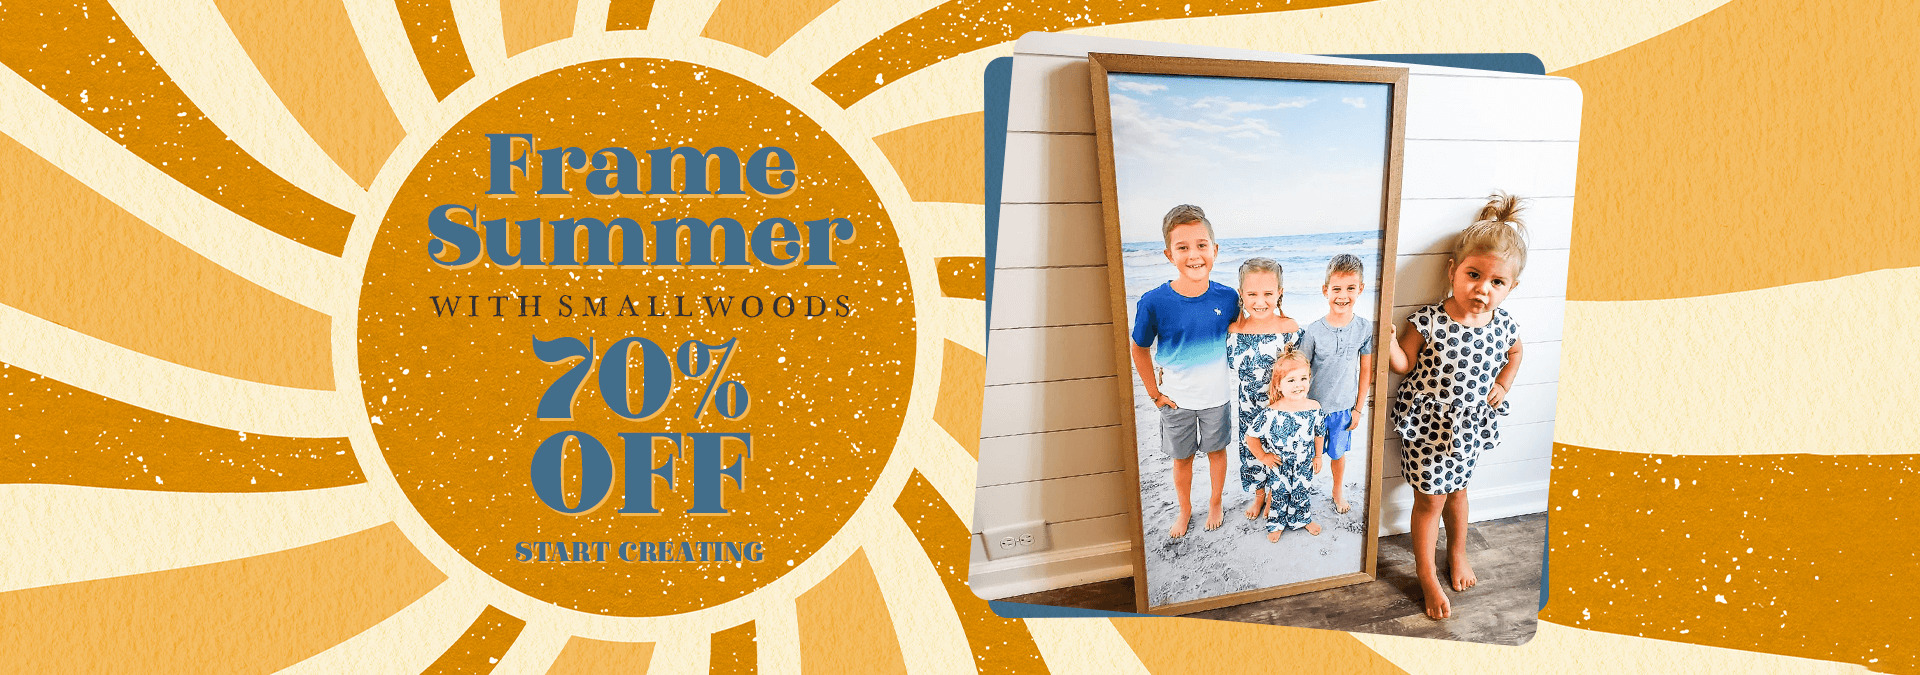 Frame Summer With Smallwoods 70% OFF - START CREATING